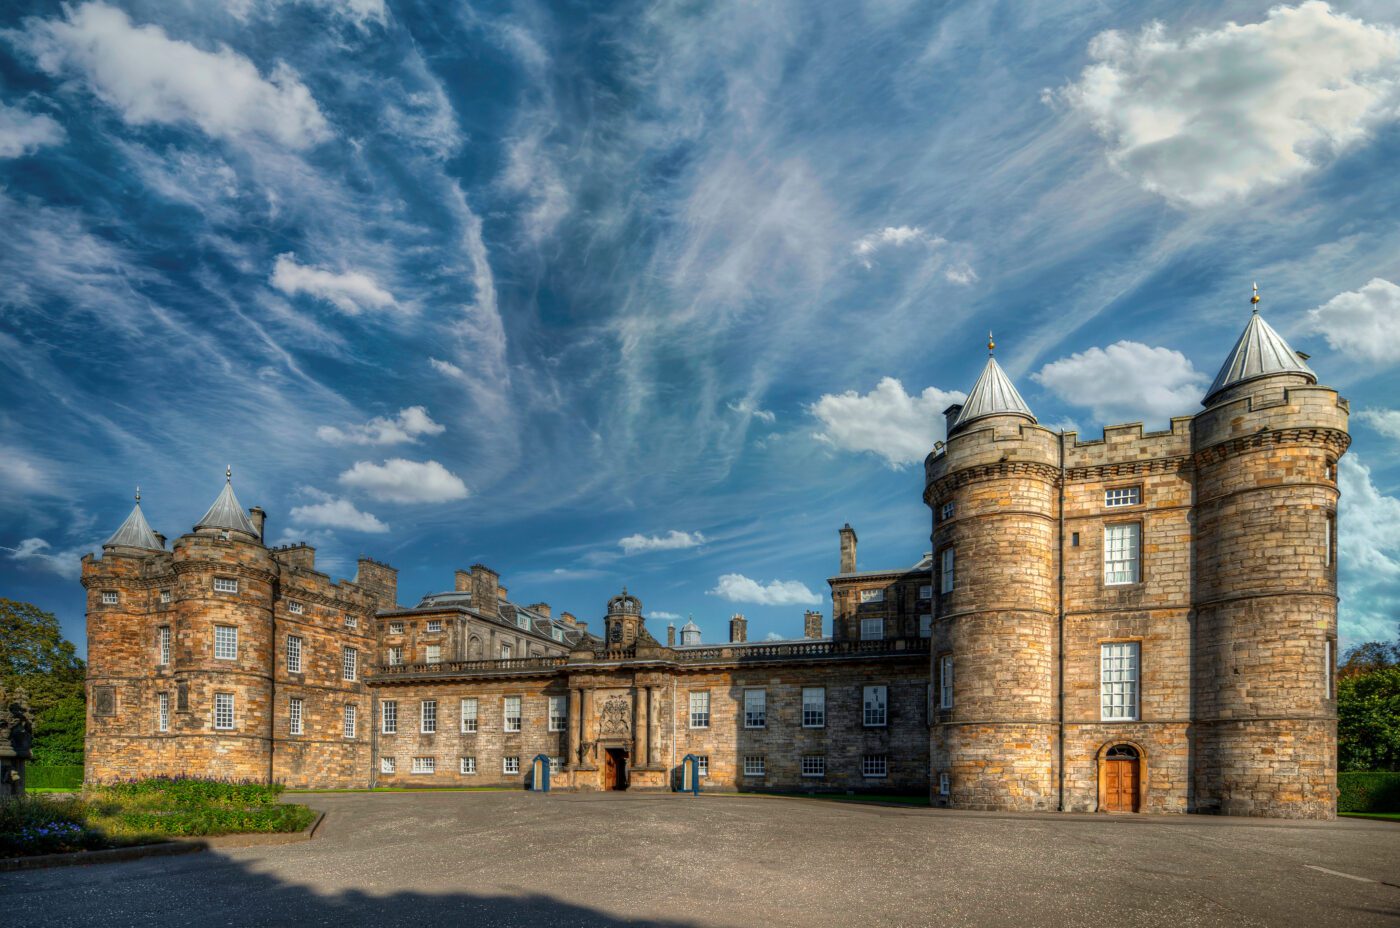 The Exterior of The Palace of Holyroodhouse in Edinburgh.